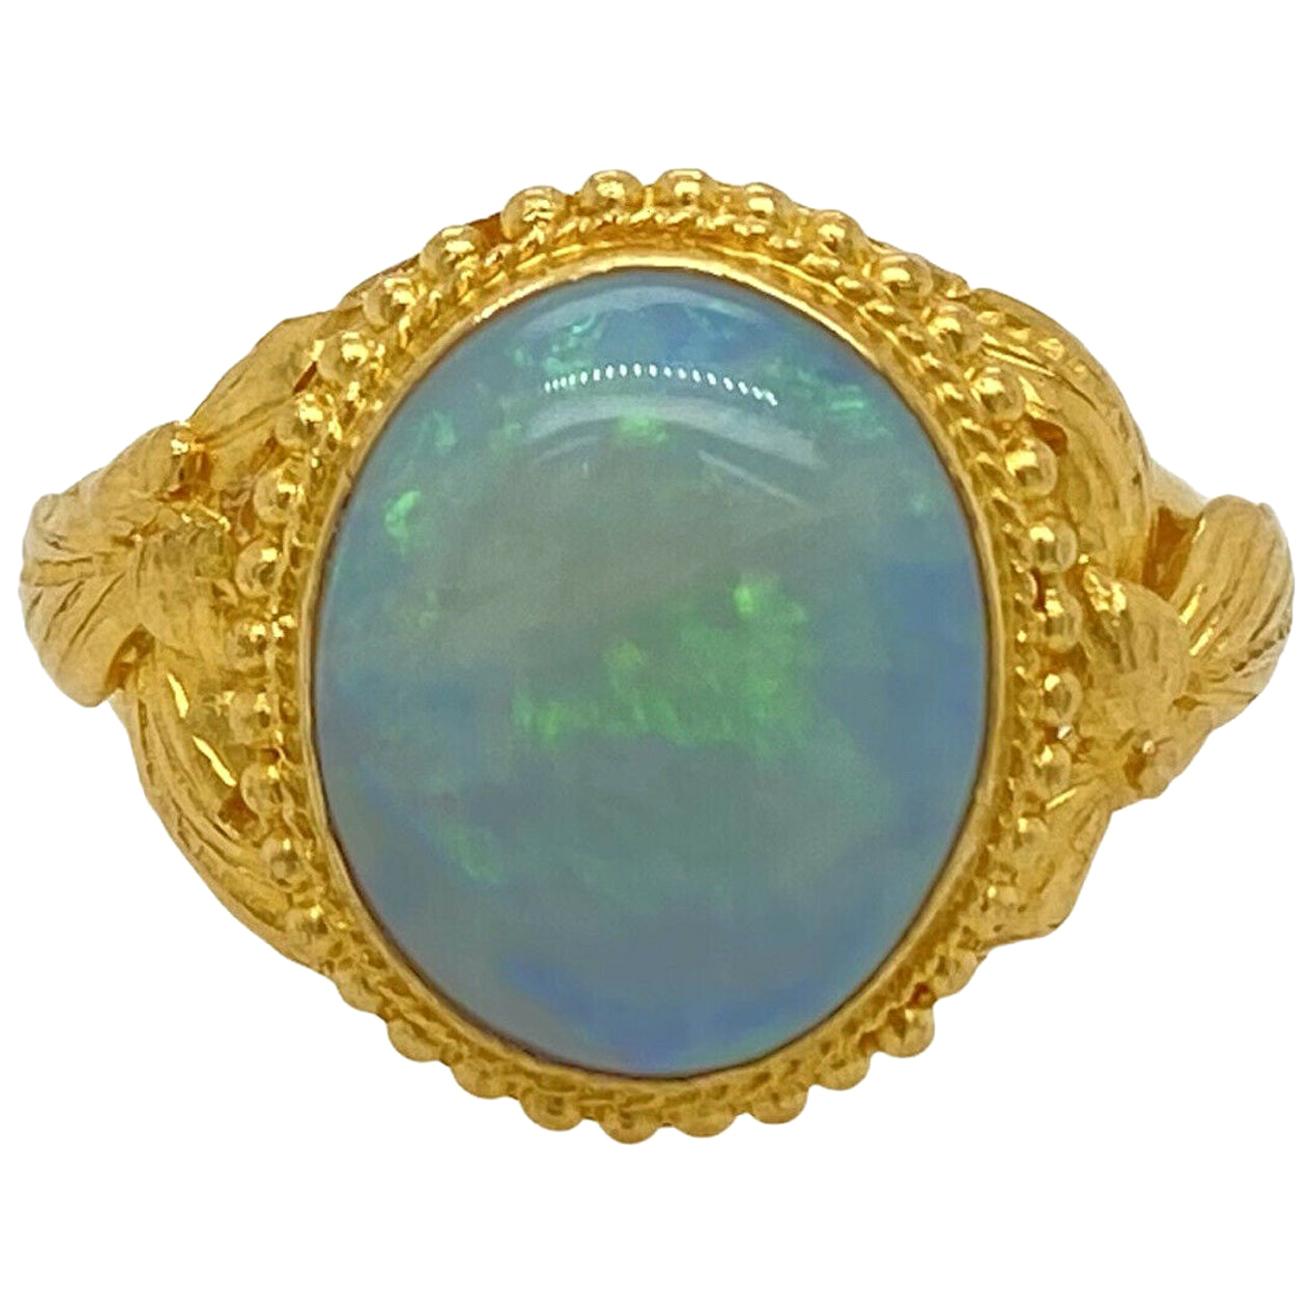 Vintage Solid 24 Karat Yellow Gold and Opal Ring 5.9g